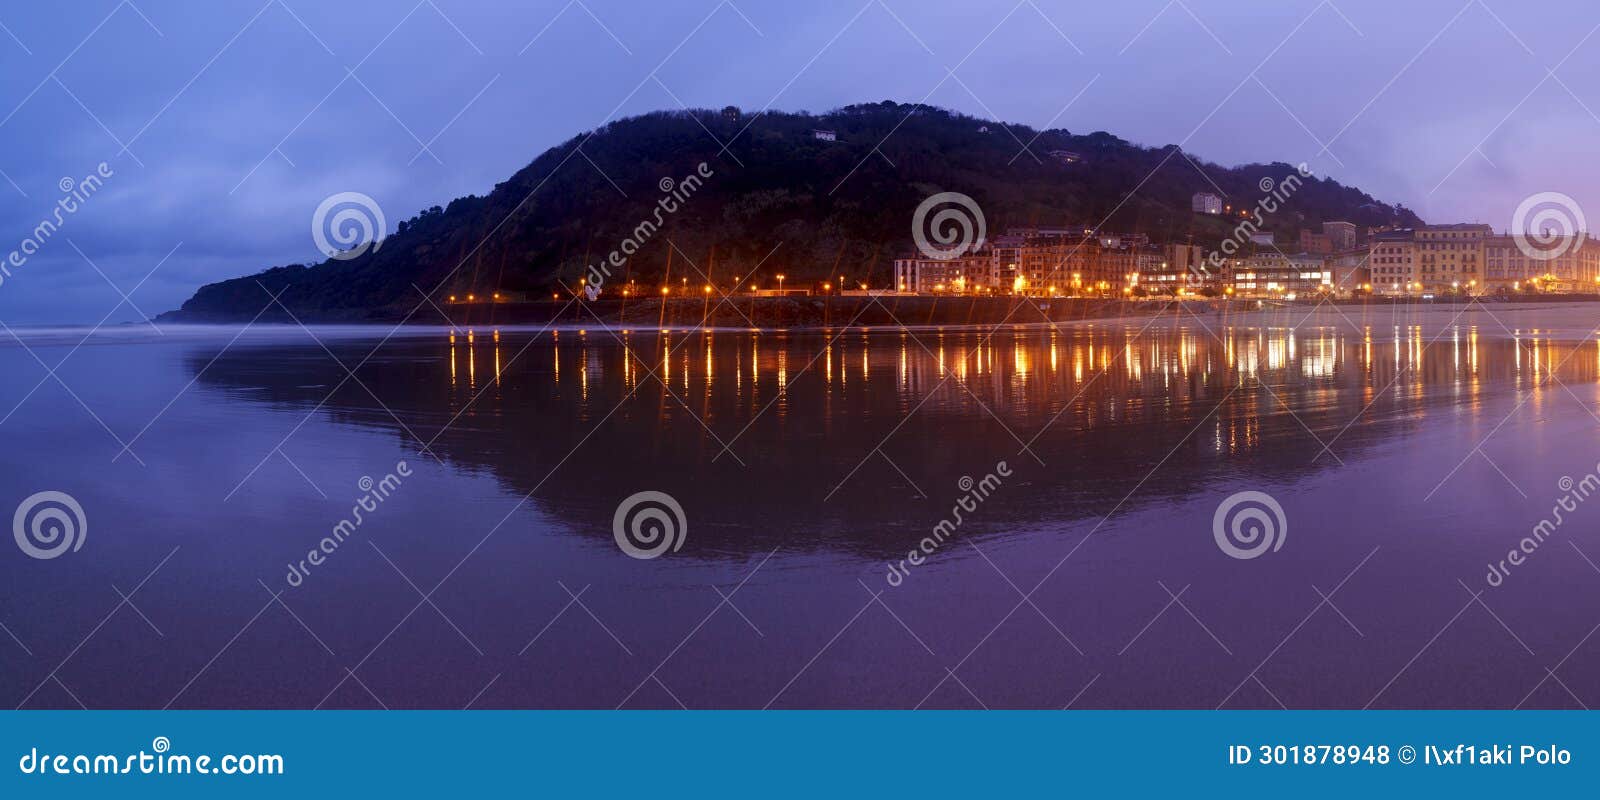 mount uliÂ­a and zurriola beach. mount ulia and the lights of the city reflected in the zurriola beach at sunrise.